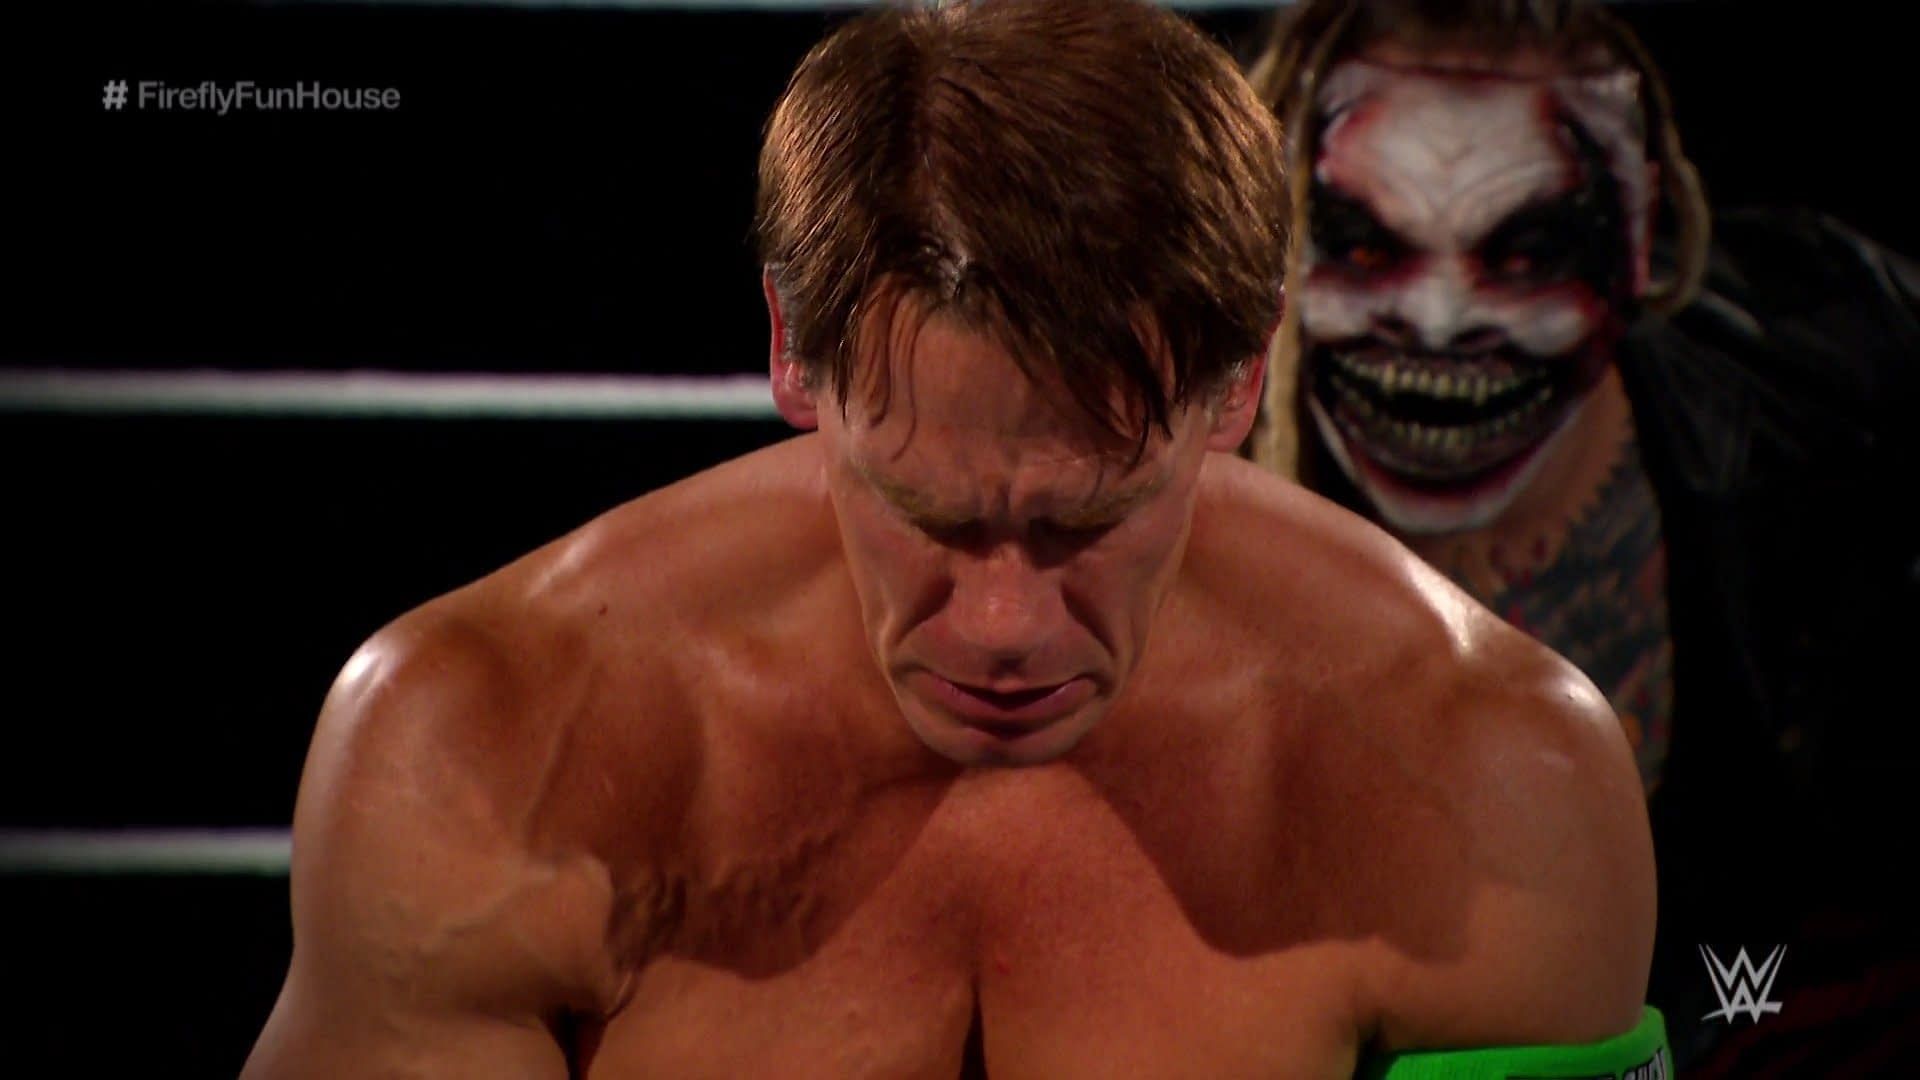 Will The Fiend re-emerge to attack John Cena?